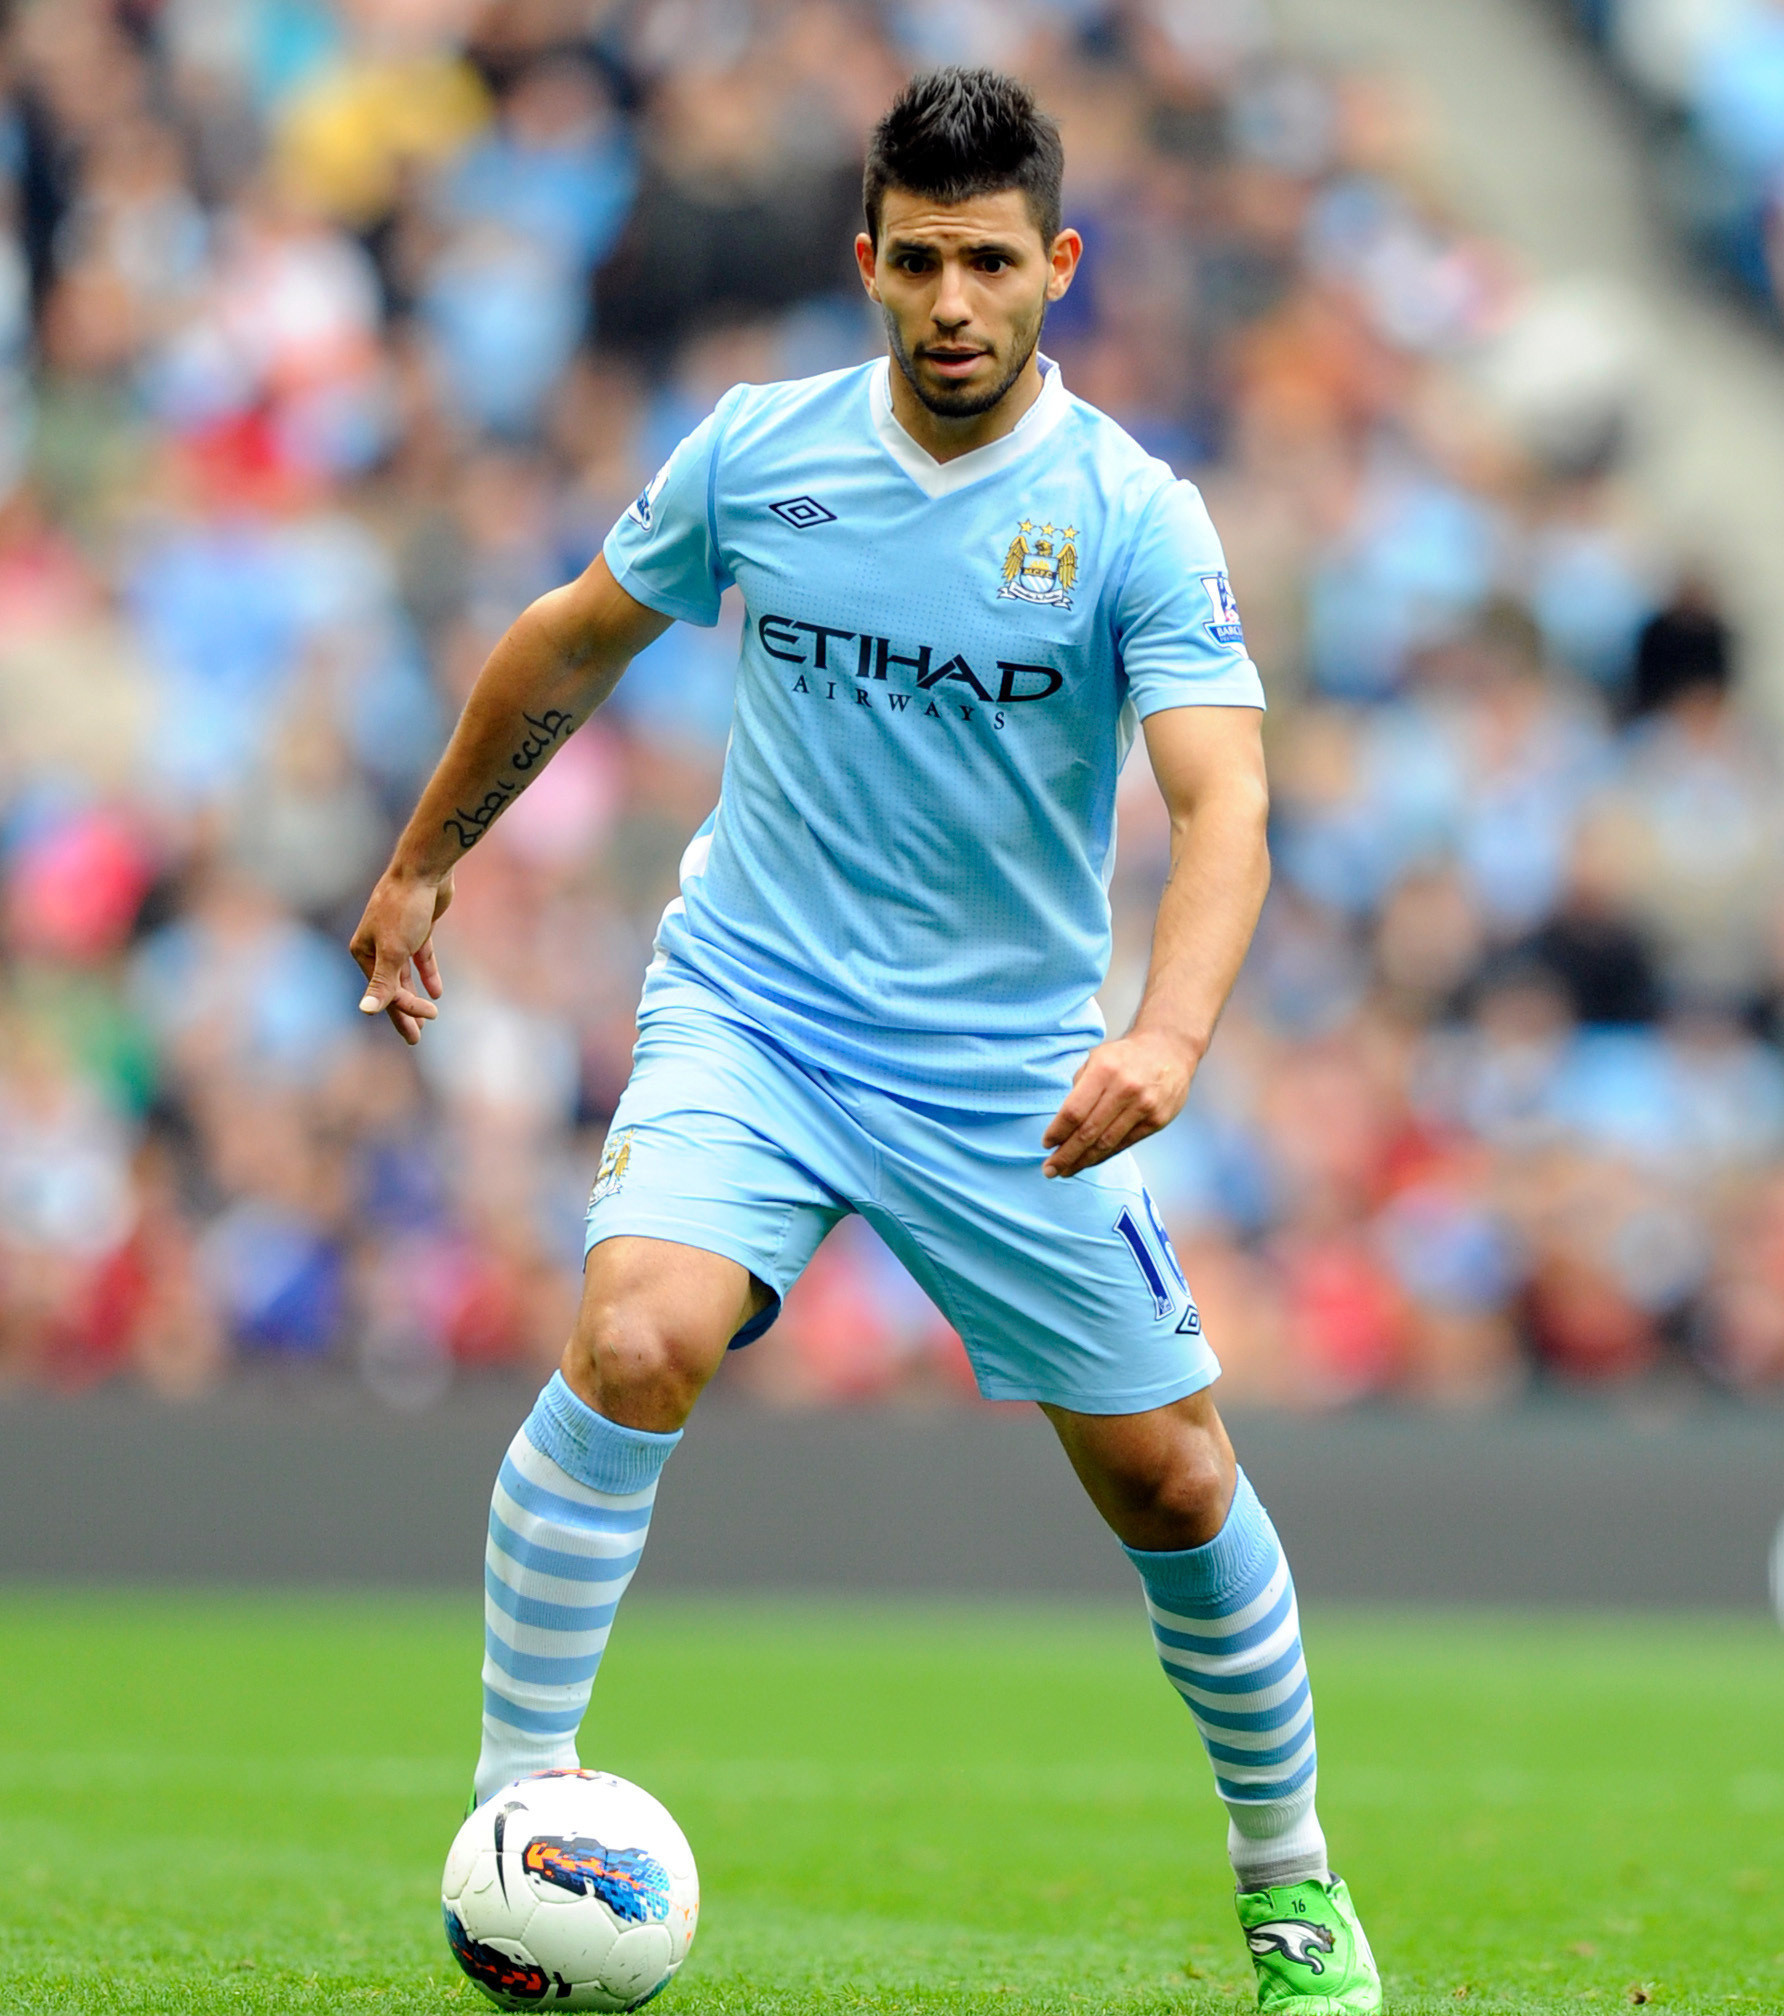 Sergio Aguero wallpapers, Pictures, Soccer, Athlete, 1790x2020 HD Handy